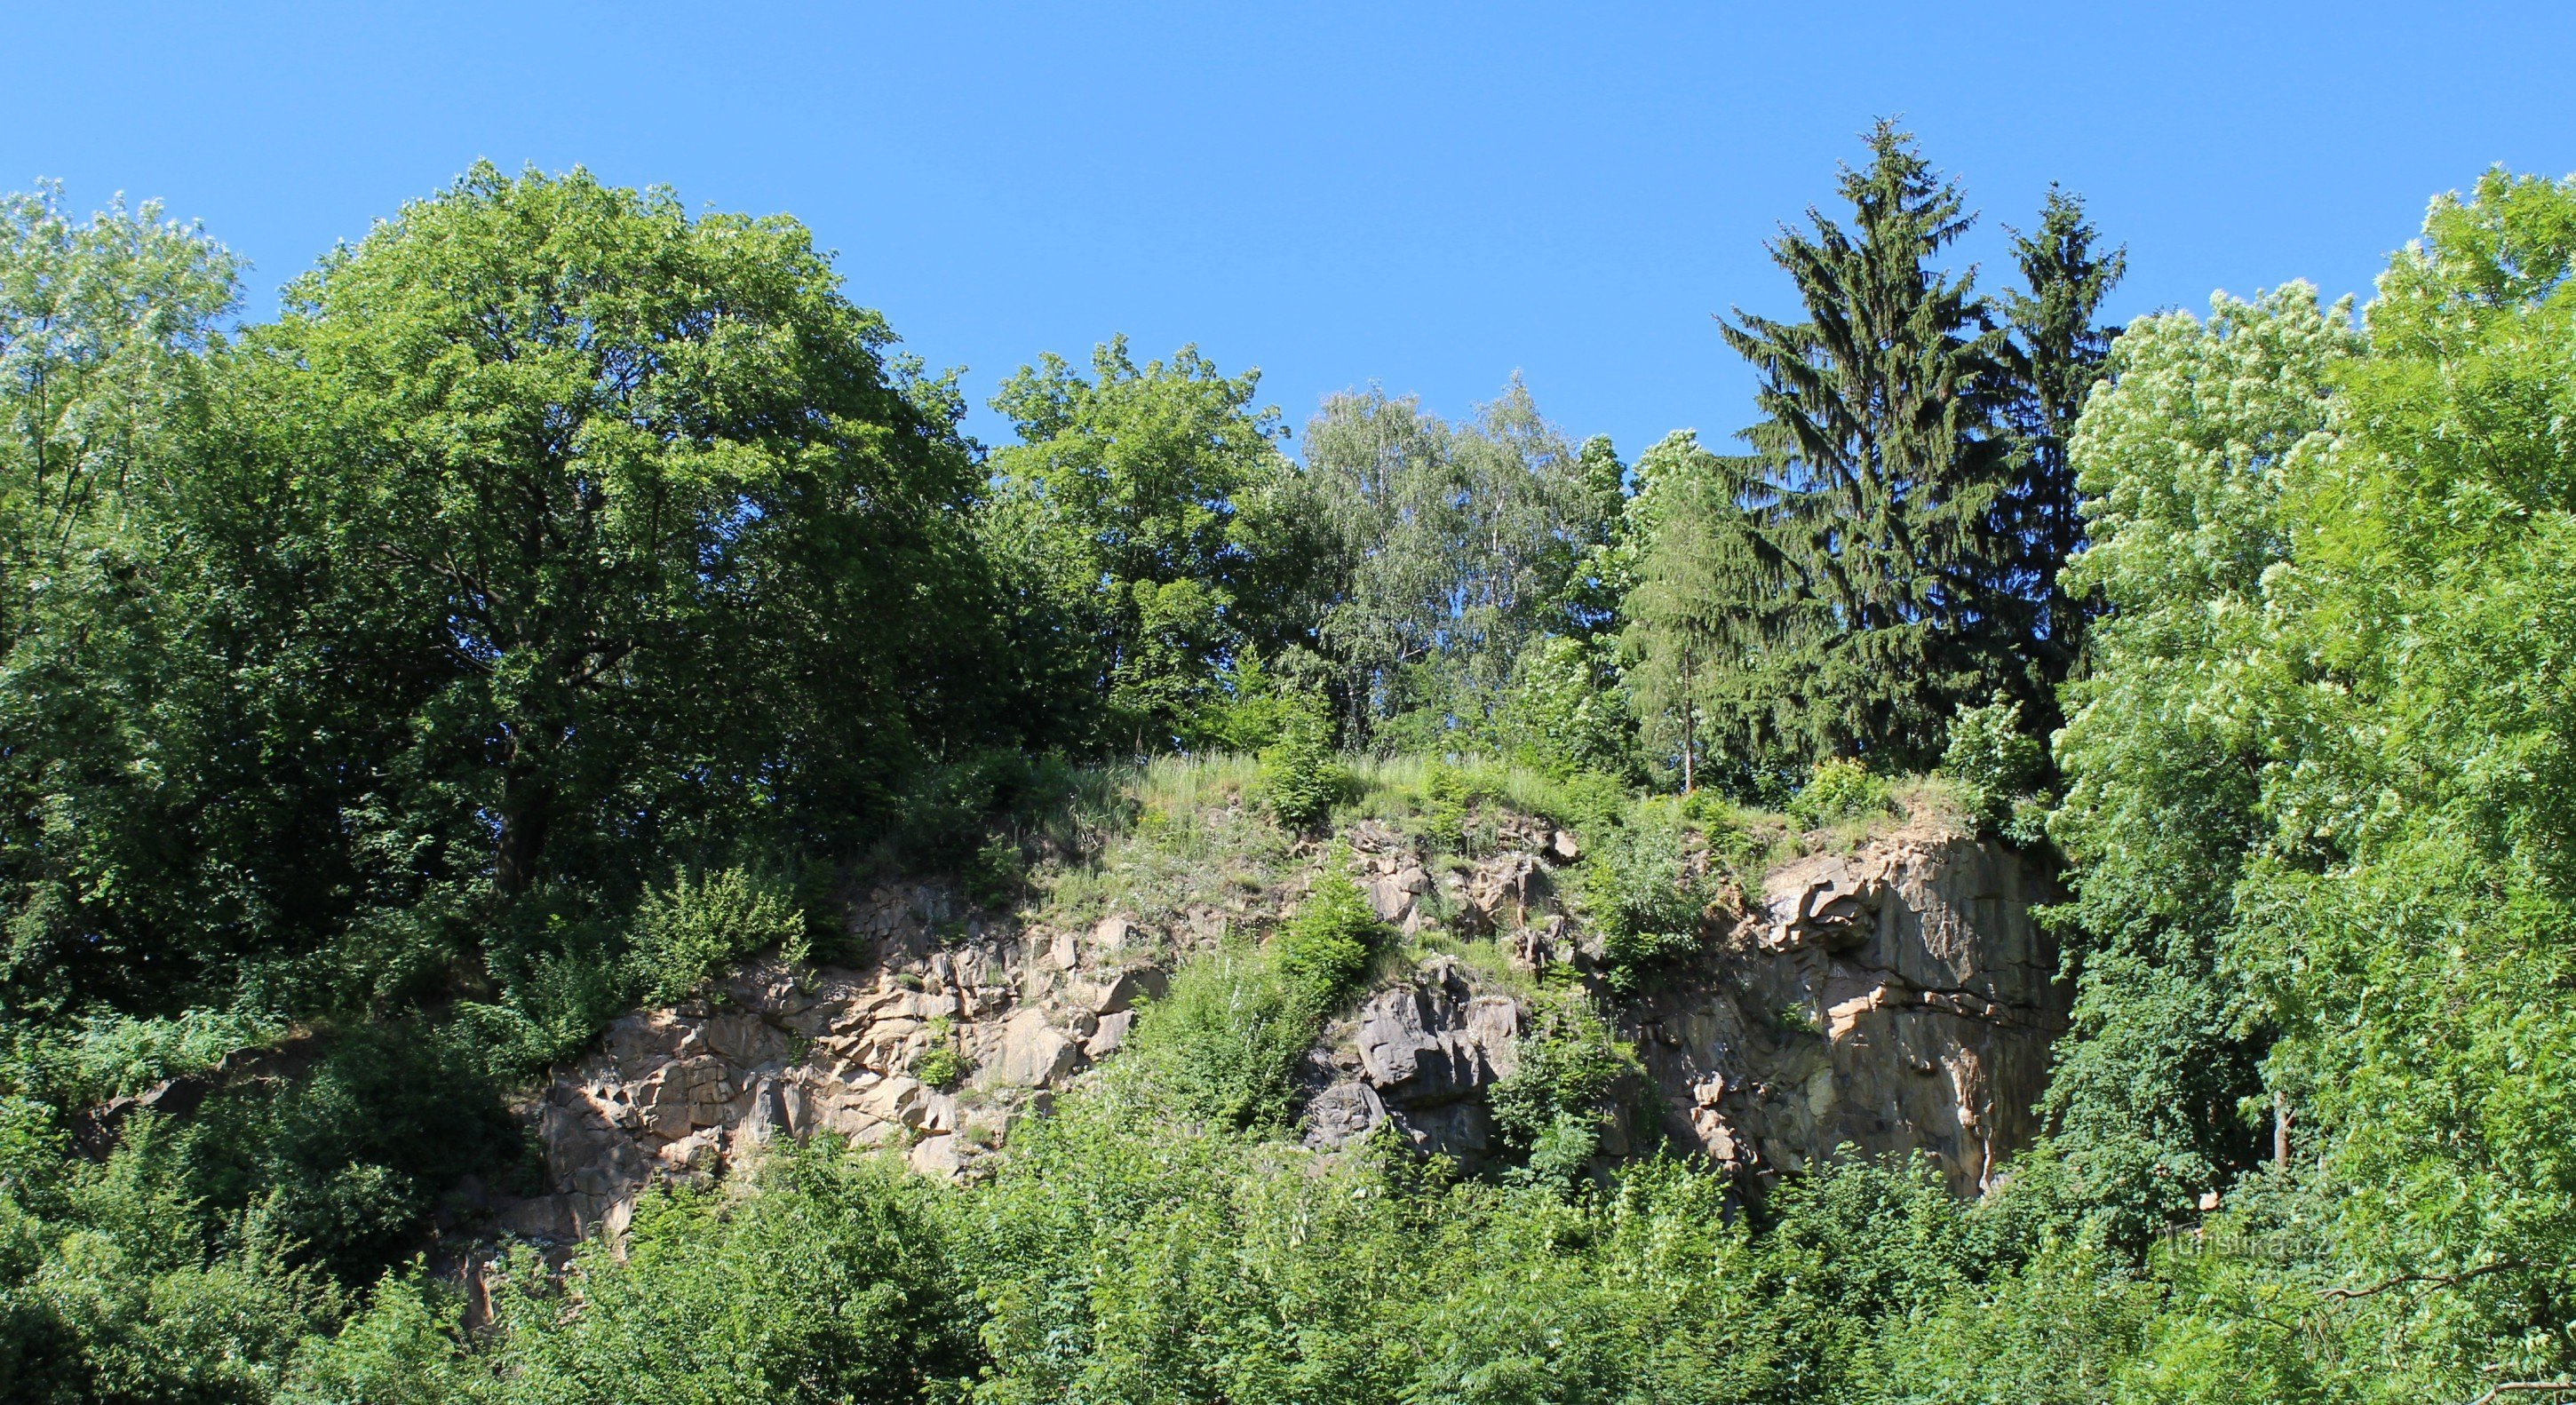 The former quarry on the right bank of Jihlávka